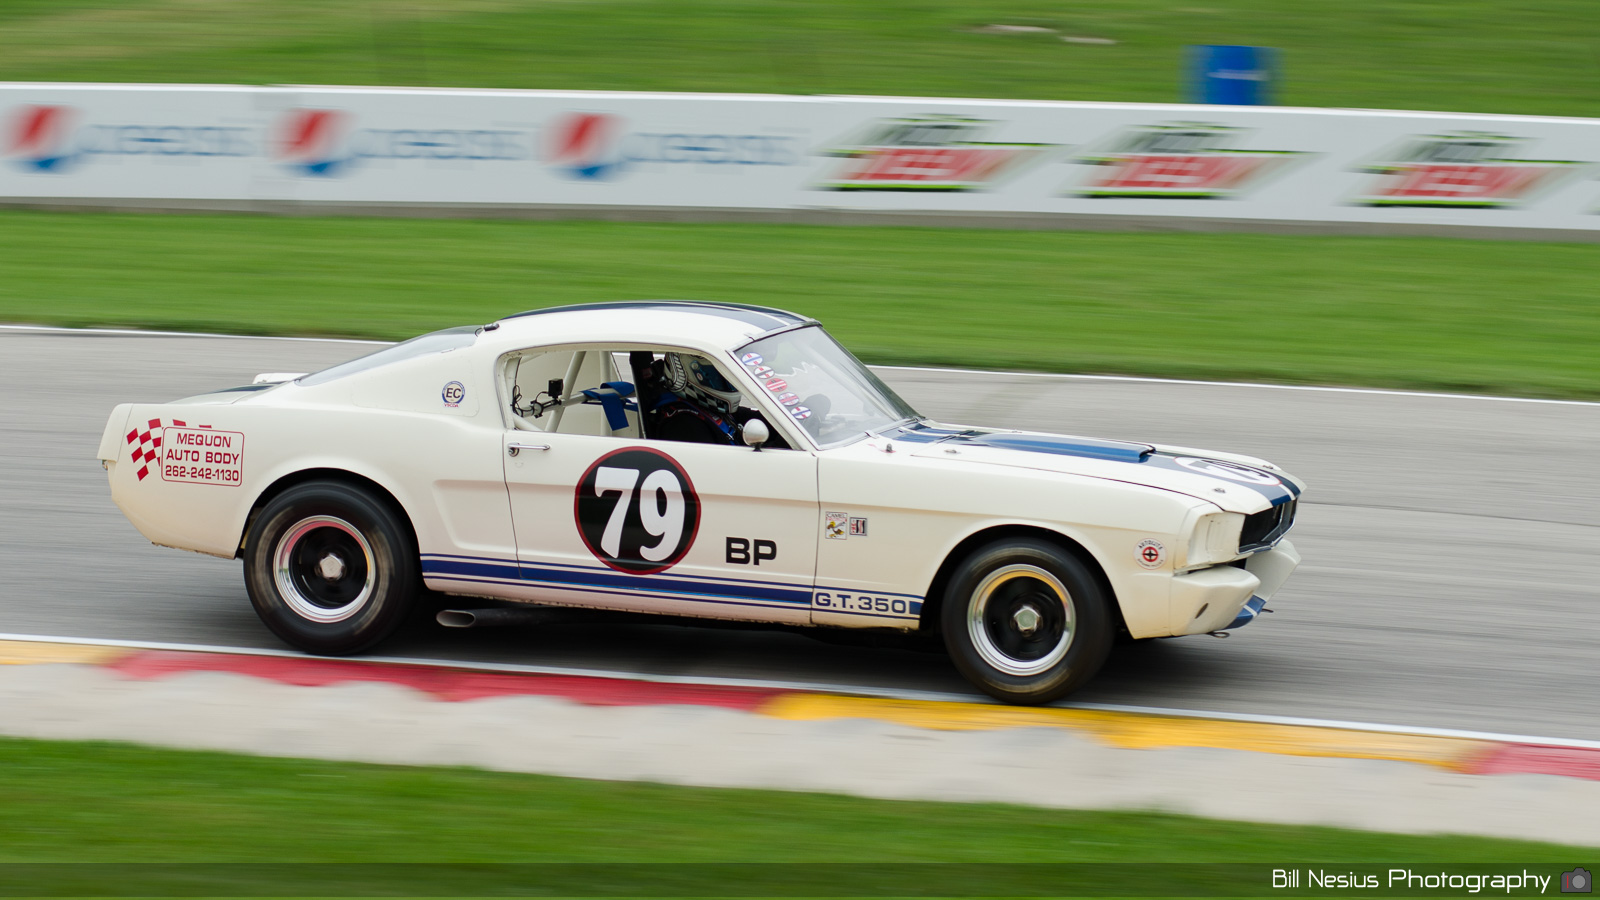 Ford Mustang Shelby GT350 Number 79 / DSC_1881 / 